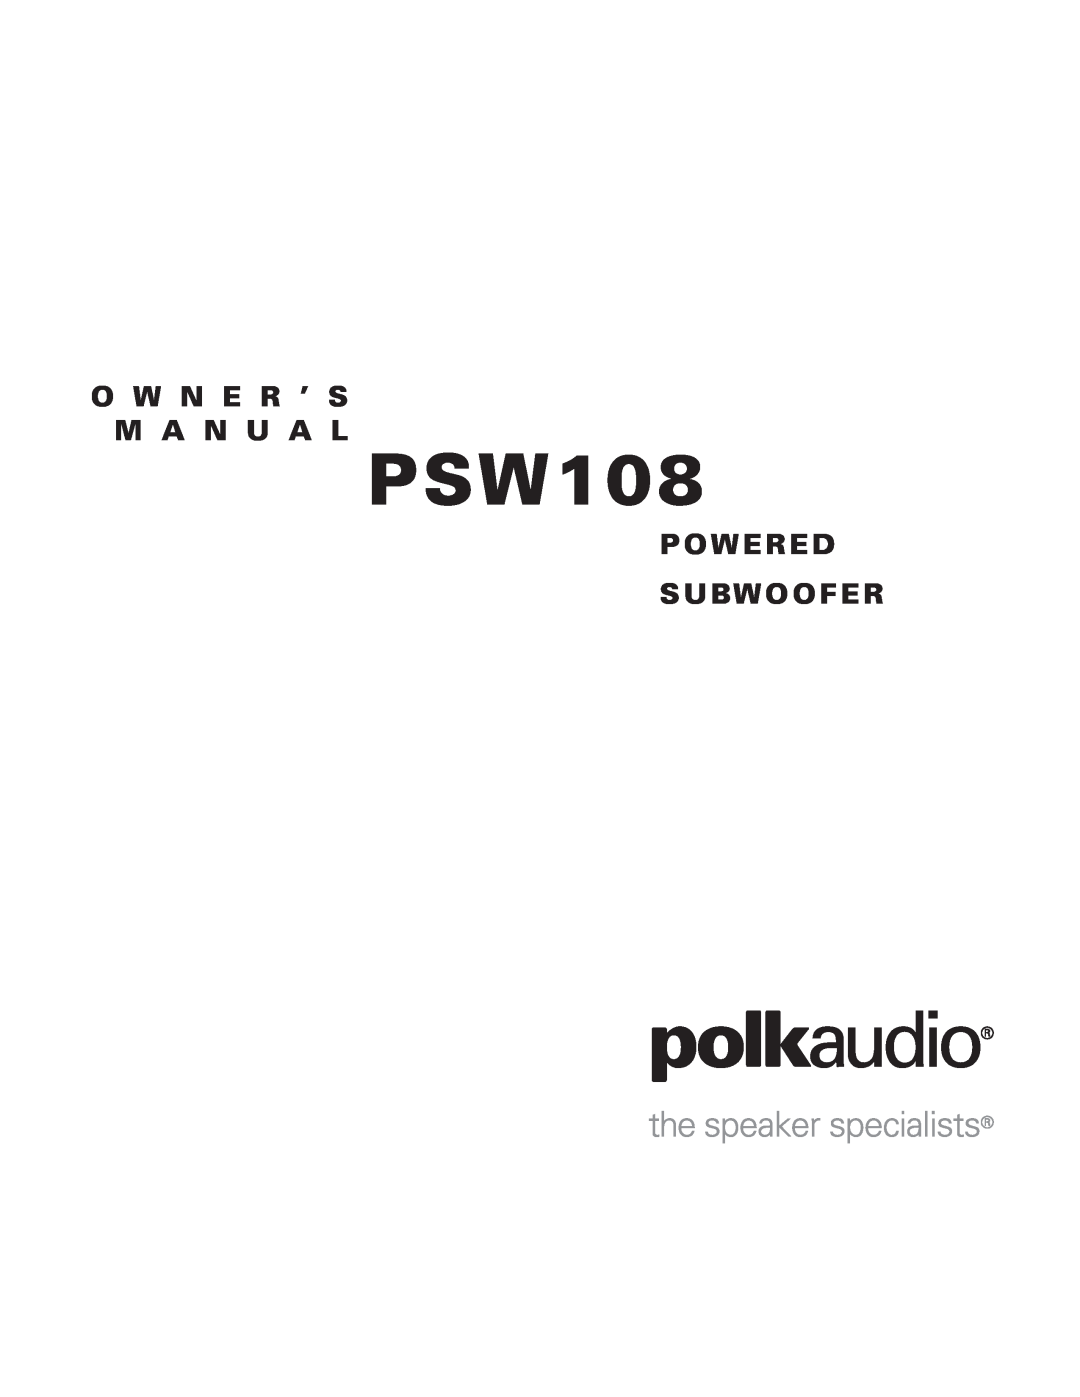 Polk Audio PSW108 owner manual O W N E R ’ S M A N U A L, Powered Subwoofer 